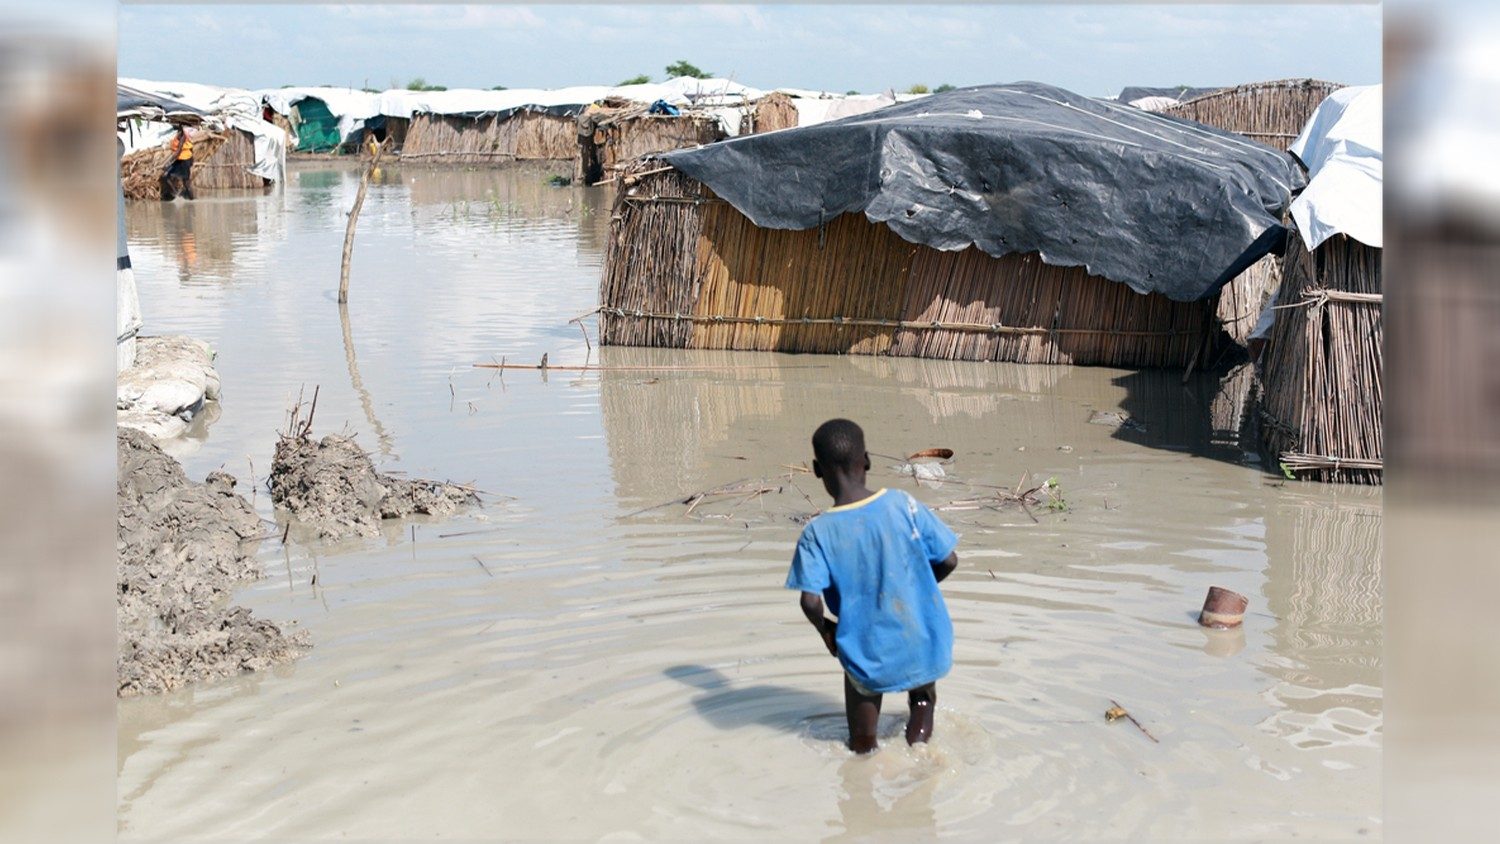 Floods in South Sudan worsen a catastrophic humanitarian crisis